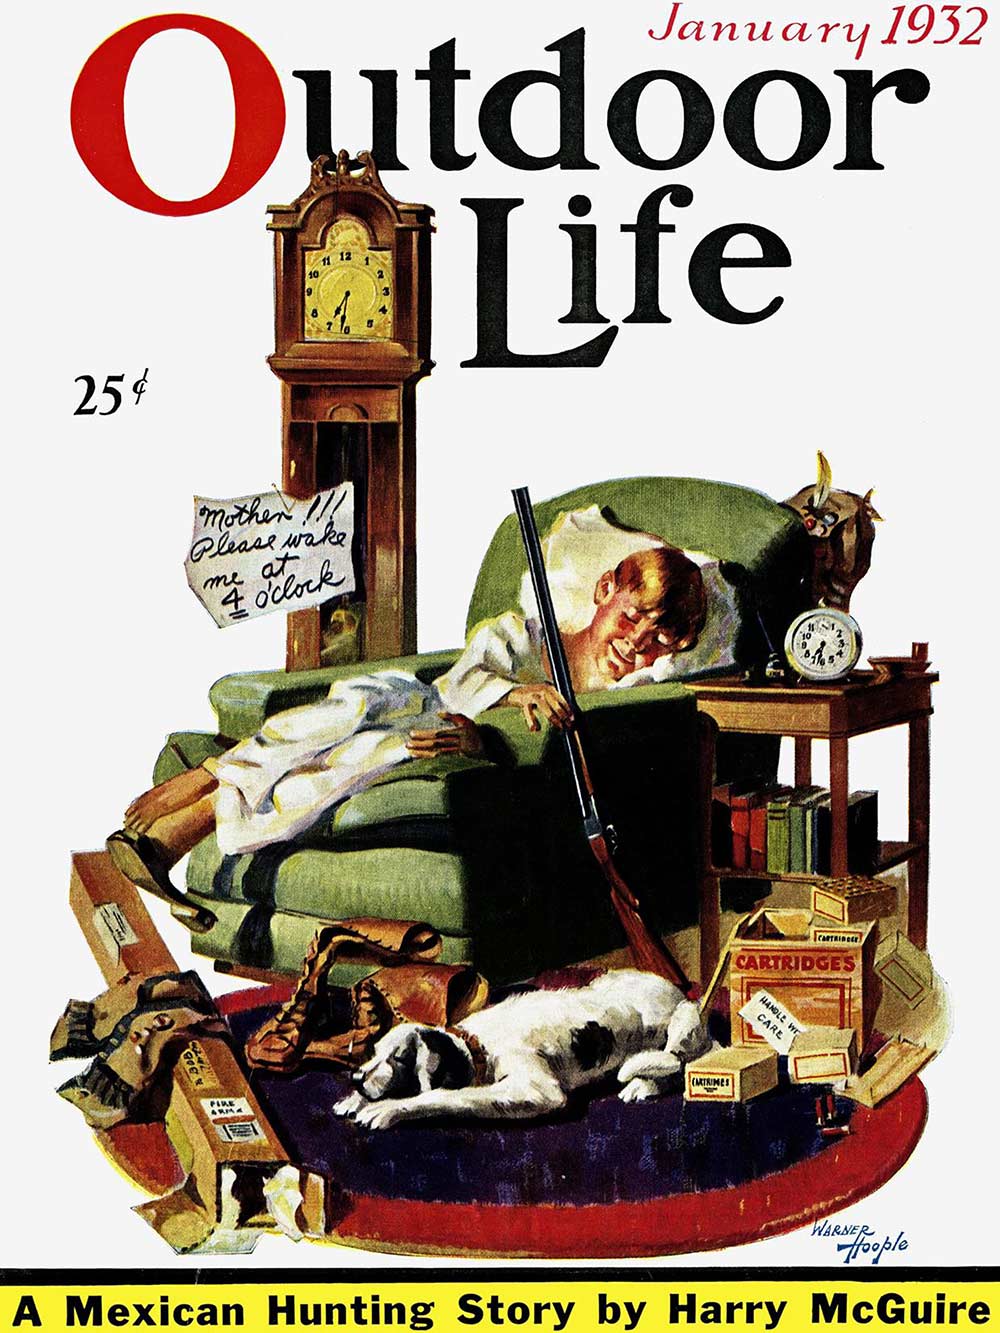 January 1932 Cover of Outdoor Life